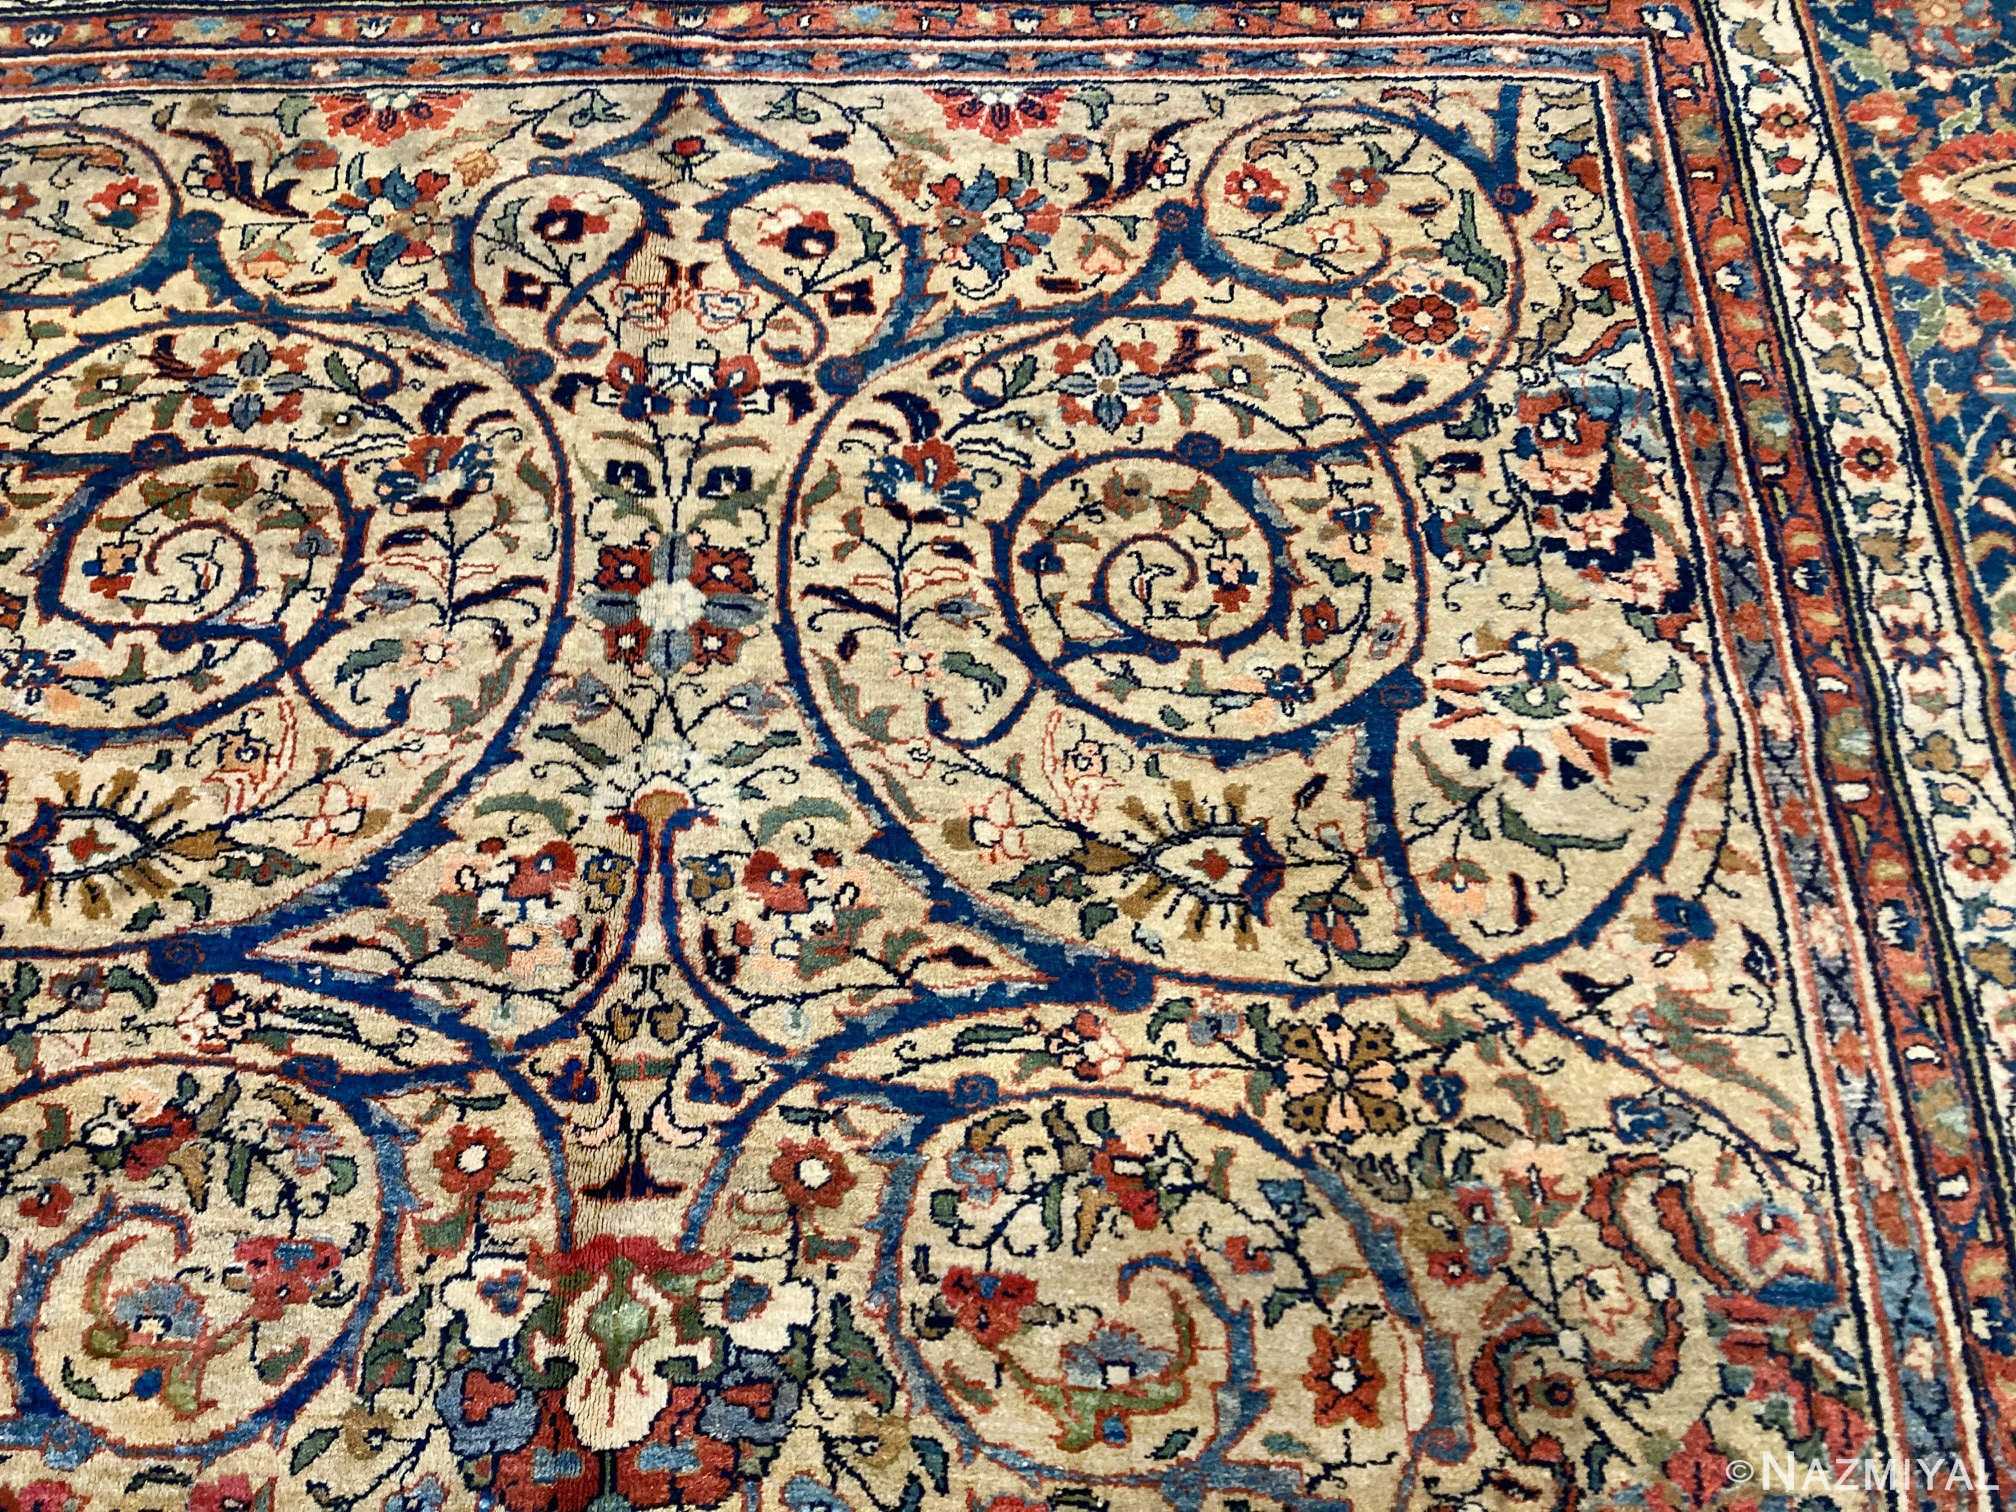 Detailed Image Of Fine Antique Room Size Persian Tabriz Area Rug 90032 by Nazmiyal Antique Rugs